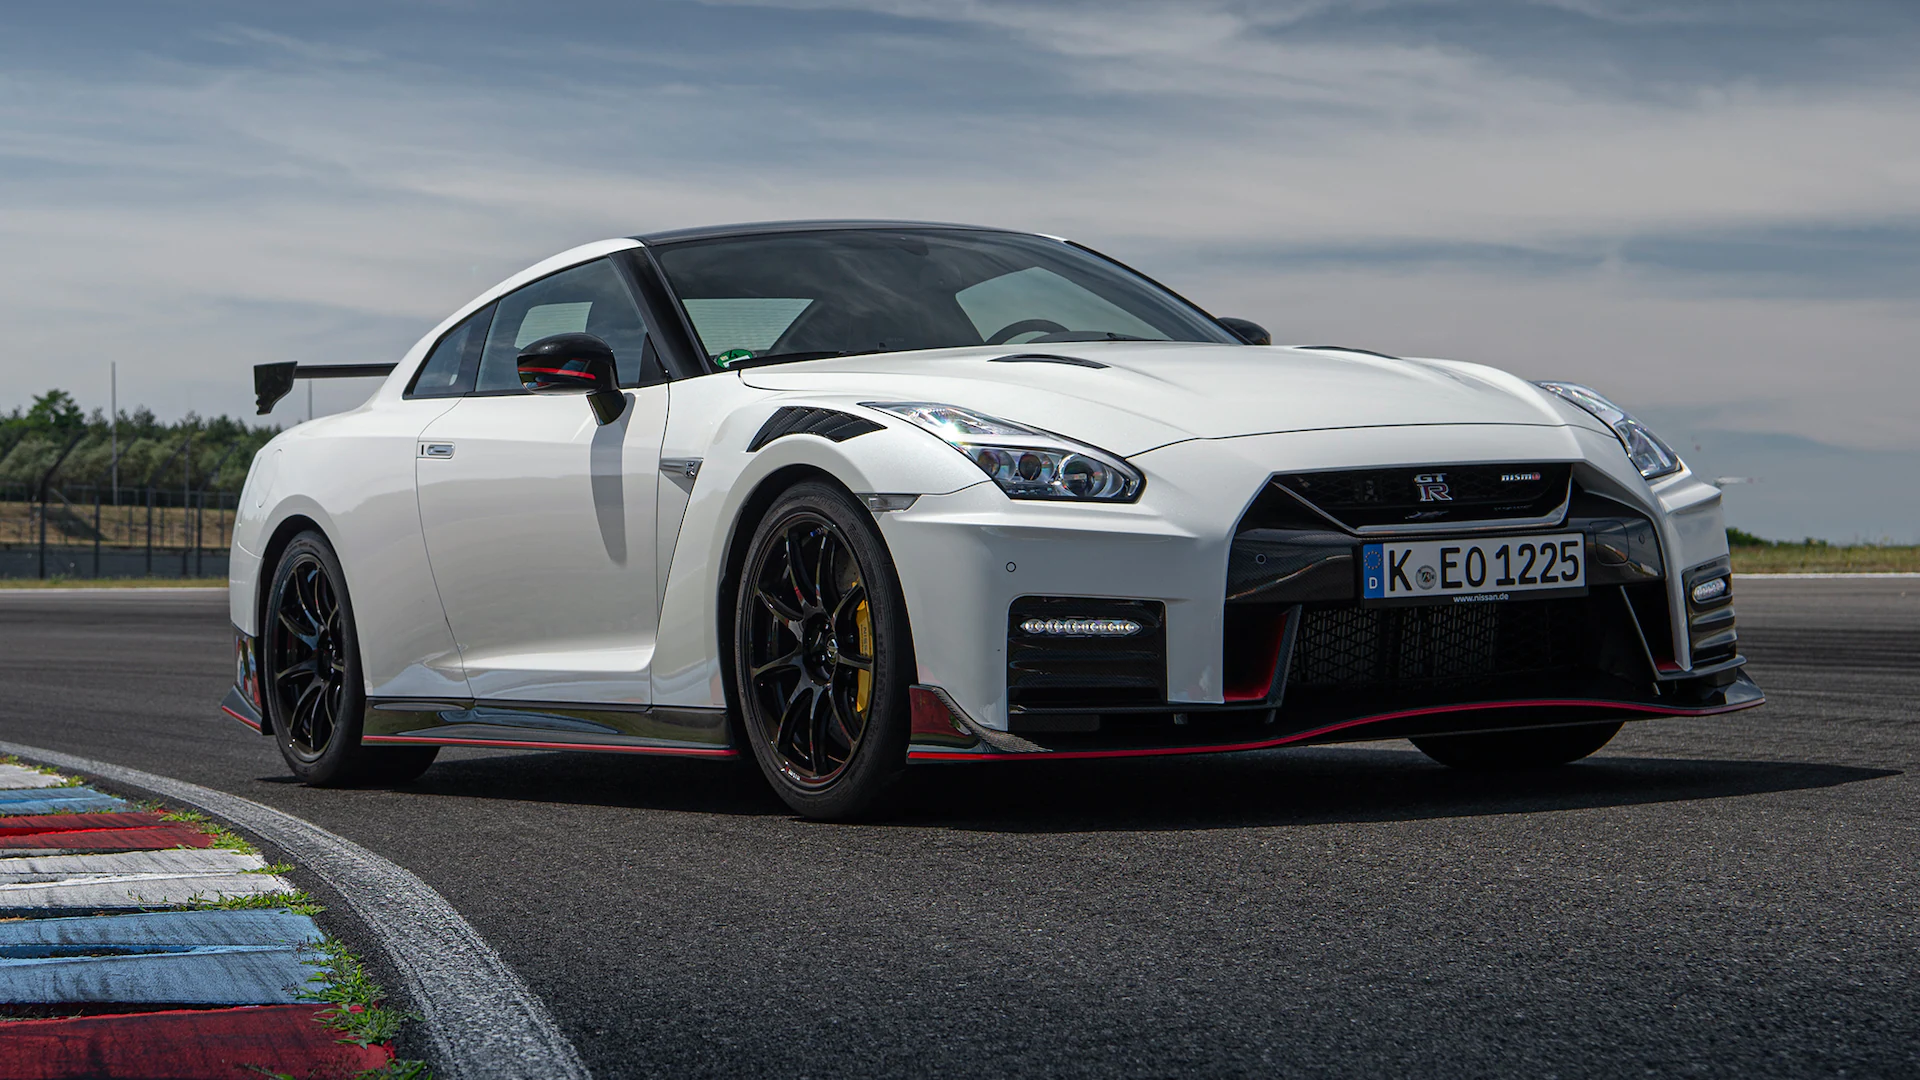 Nissan GT-R 2020 featured